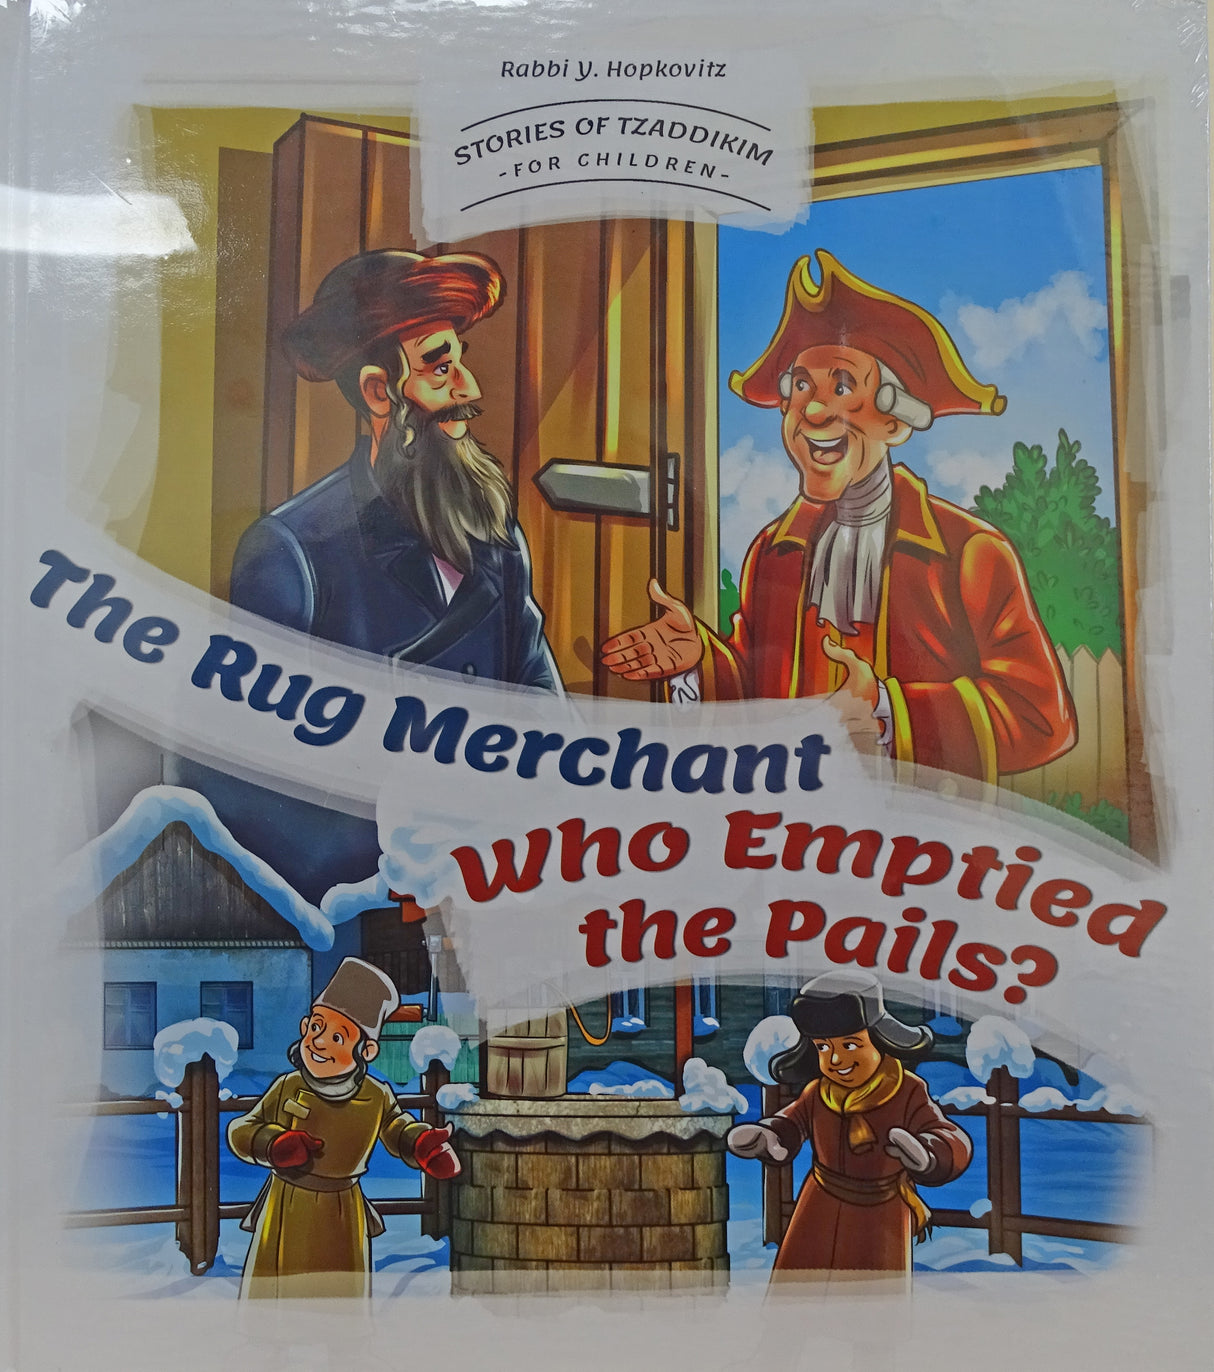 Rug Merchant/Who Emptied the Pails? -Laminated Reinforced binding